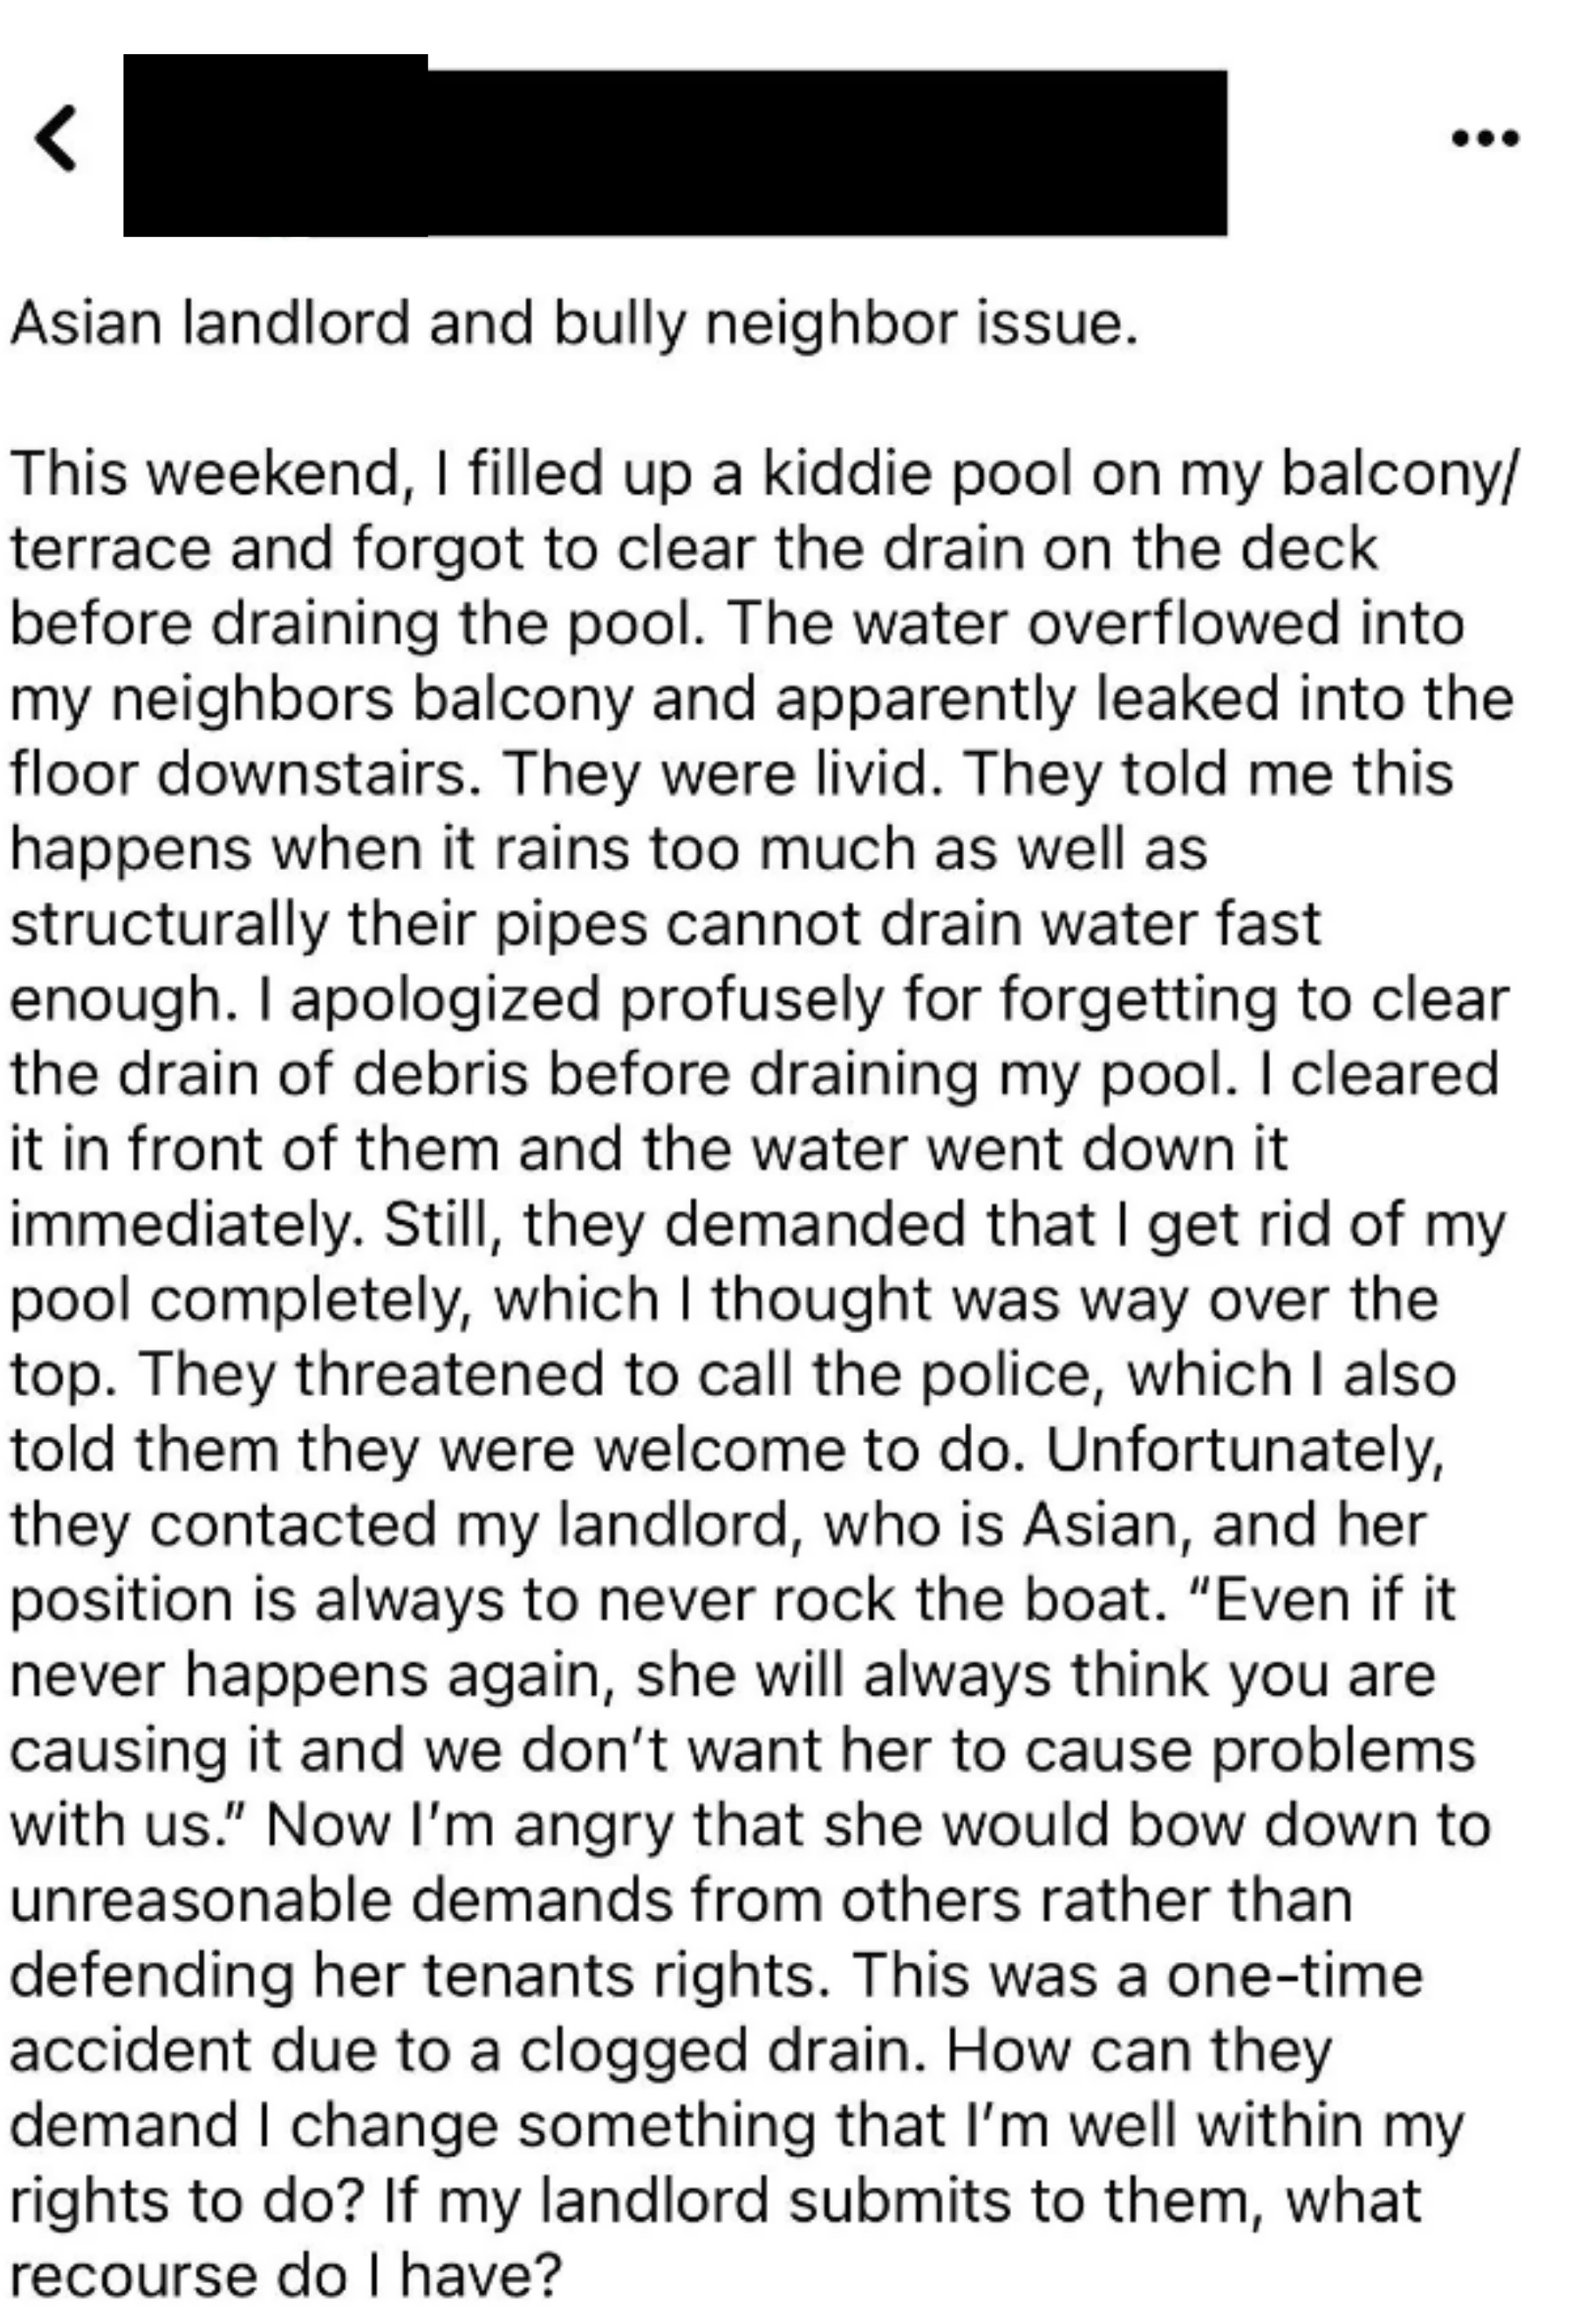 &quot;Asian landlord and bully neighbor issue&quot;